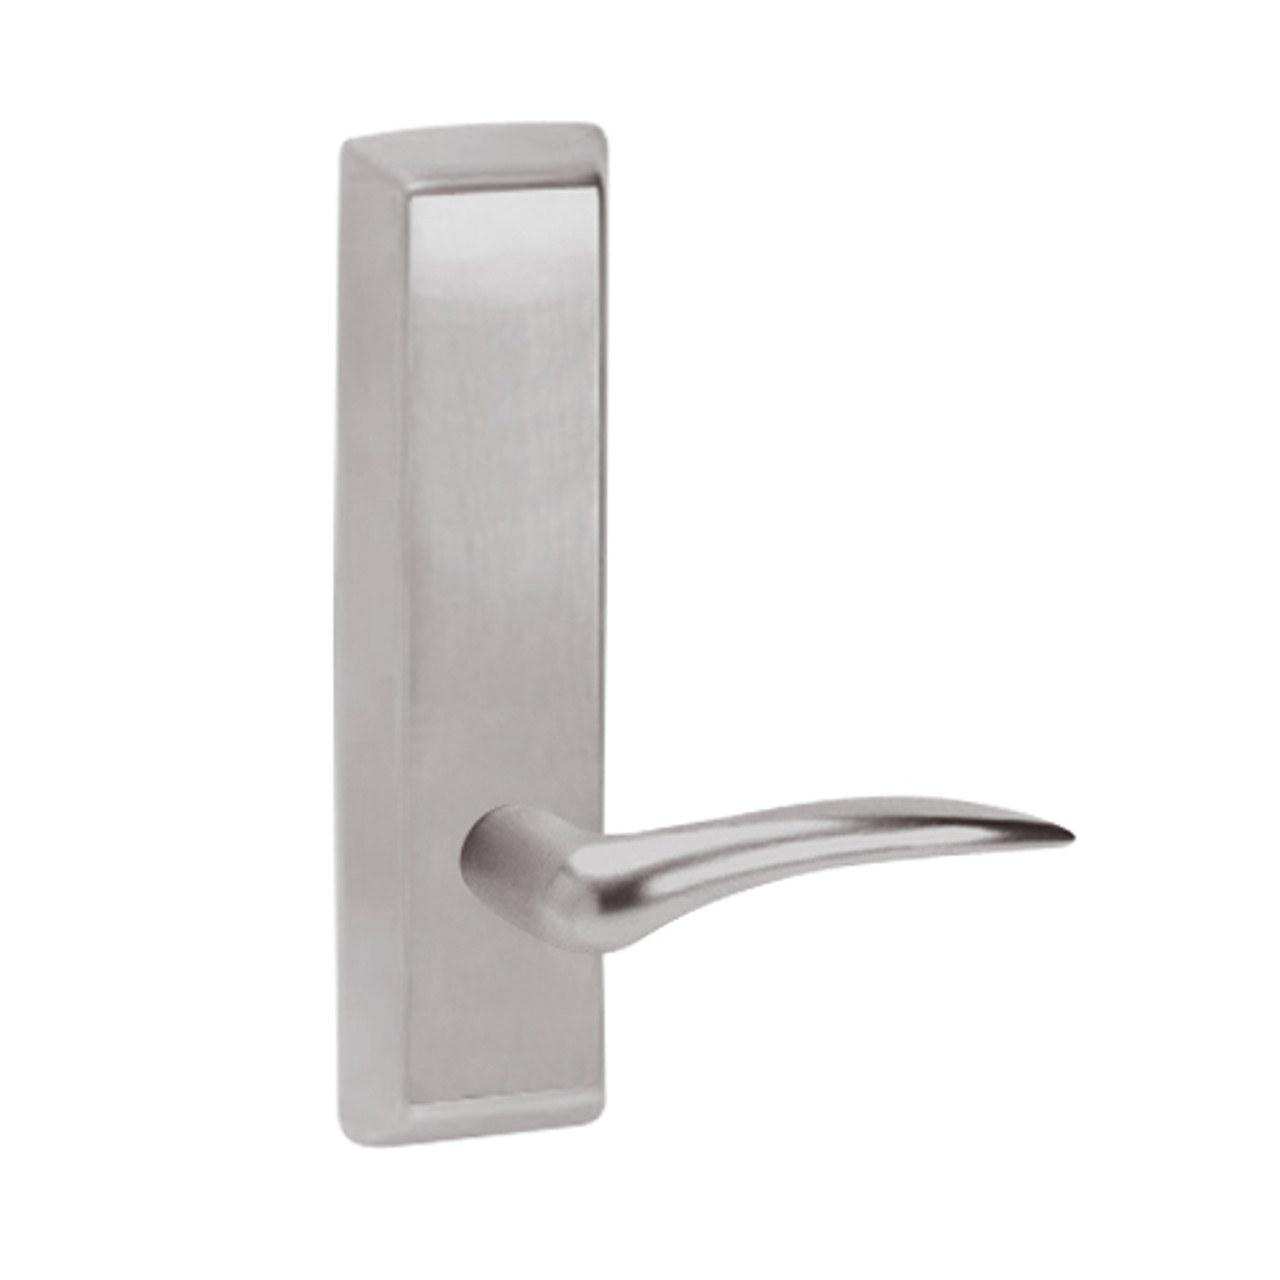 D955-630-RHR Corbin ED5000 Series Exit Device Trim with Classroom Dirke Lever in Satin Stainless Steel Finish